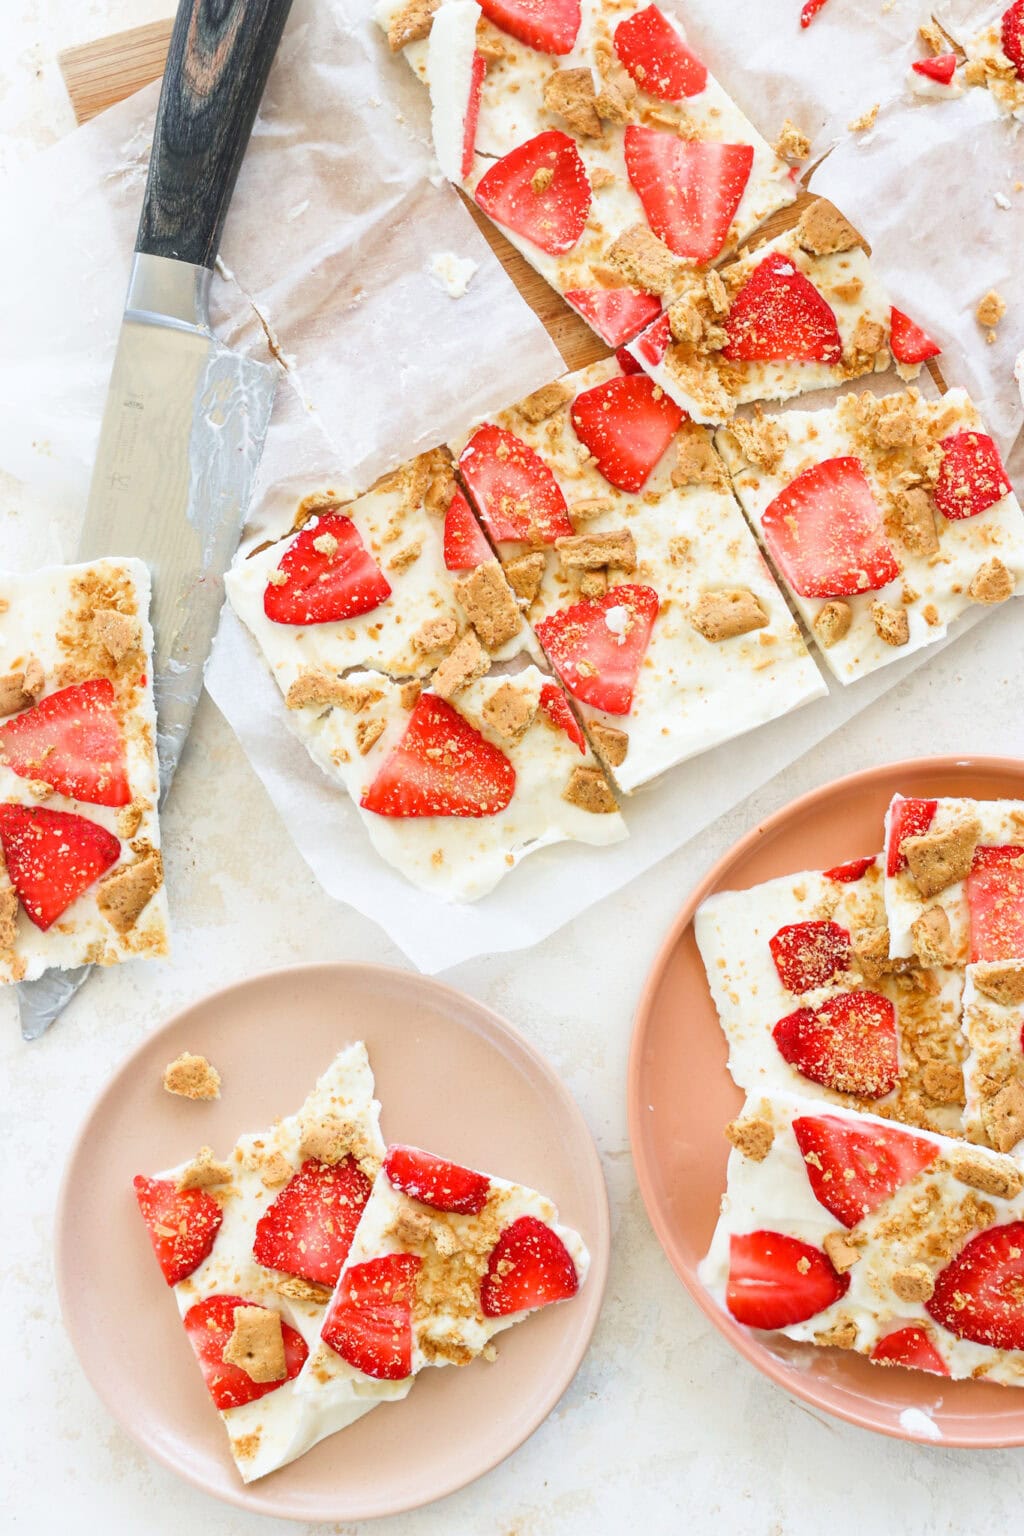 High Protein Frozen Greek Yogurt Cheesecake Bark with Strawberries on a pink plate with a knife and more cut pieces on the side